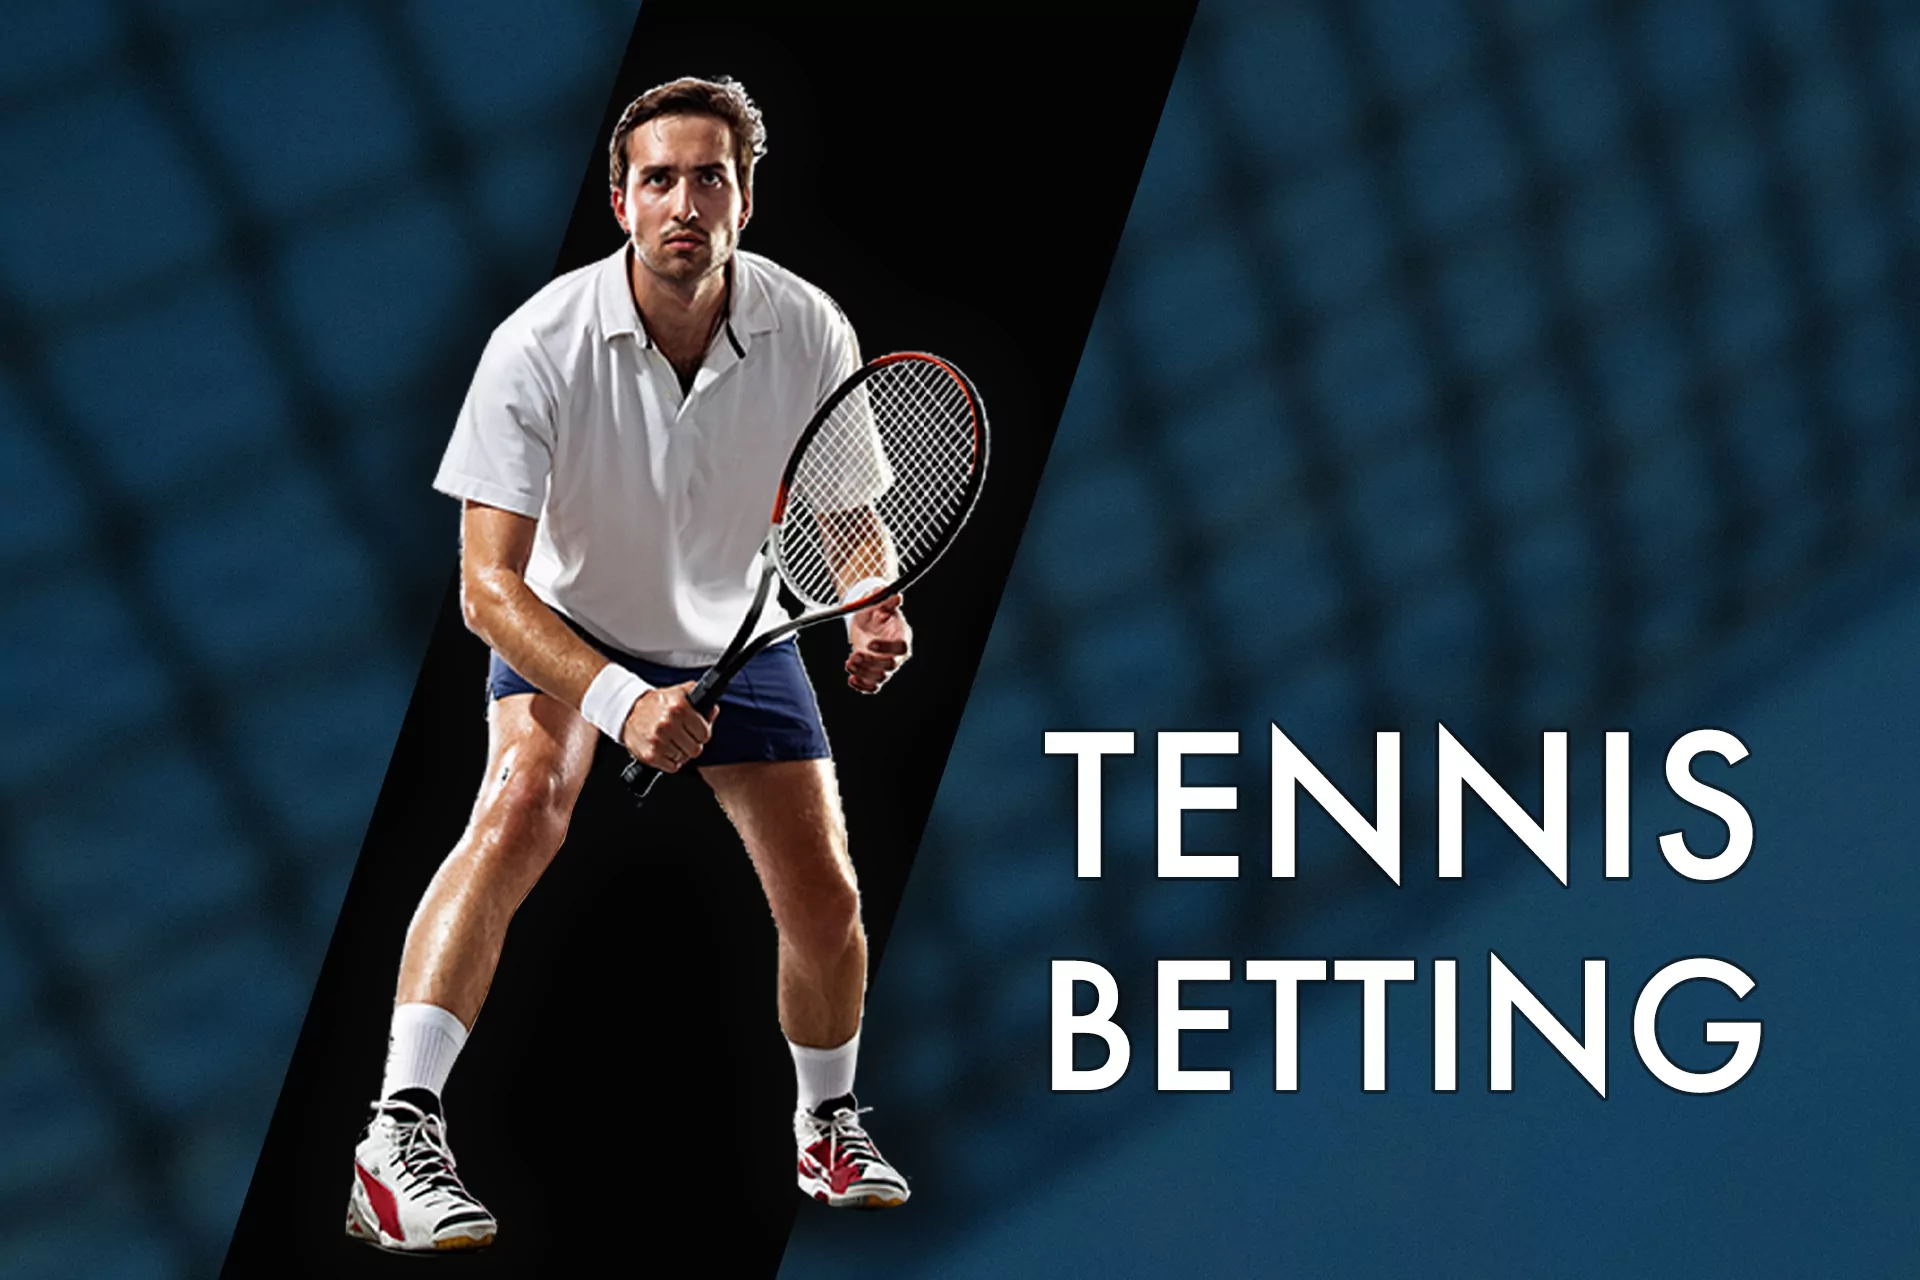 To bet on tennis with the highest odds to win, you have to deep into an analysis of the players' abilities.